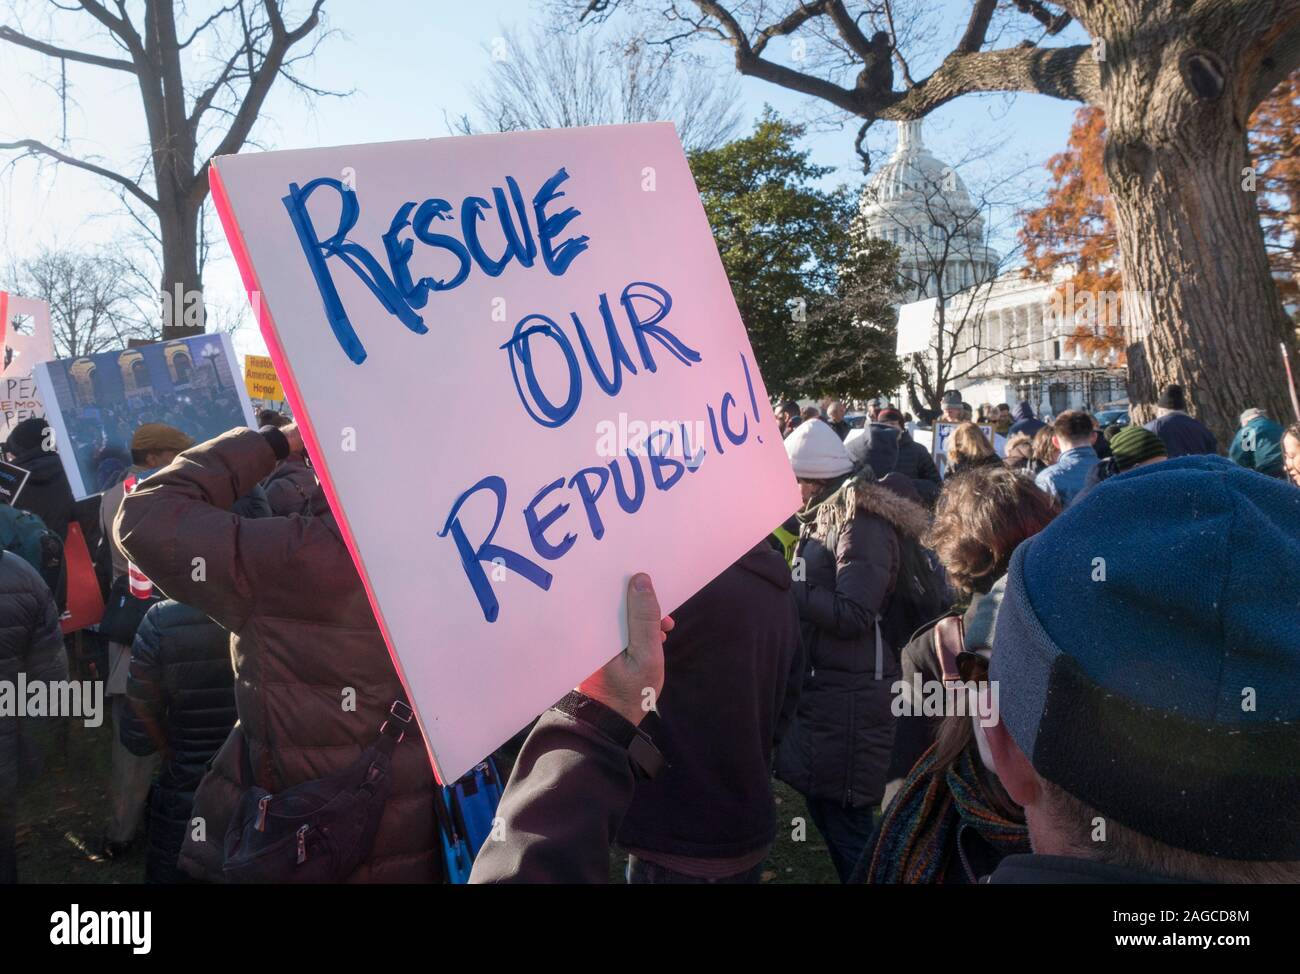 WASHINGTON, DC - DEC. 18, 2019: Some of hundreds at rally to support the impeachment of President Donald Trump at the U.S. Capitol on day of House of Representatives vote on articles of impeachment. Stock Photo